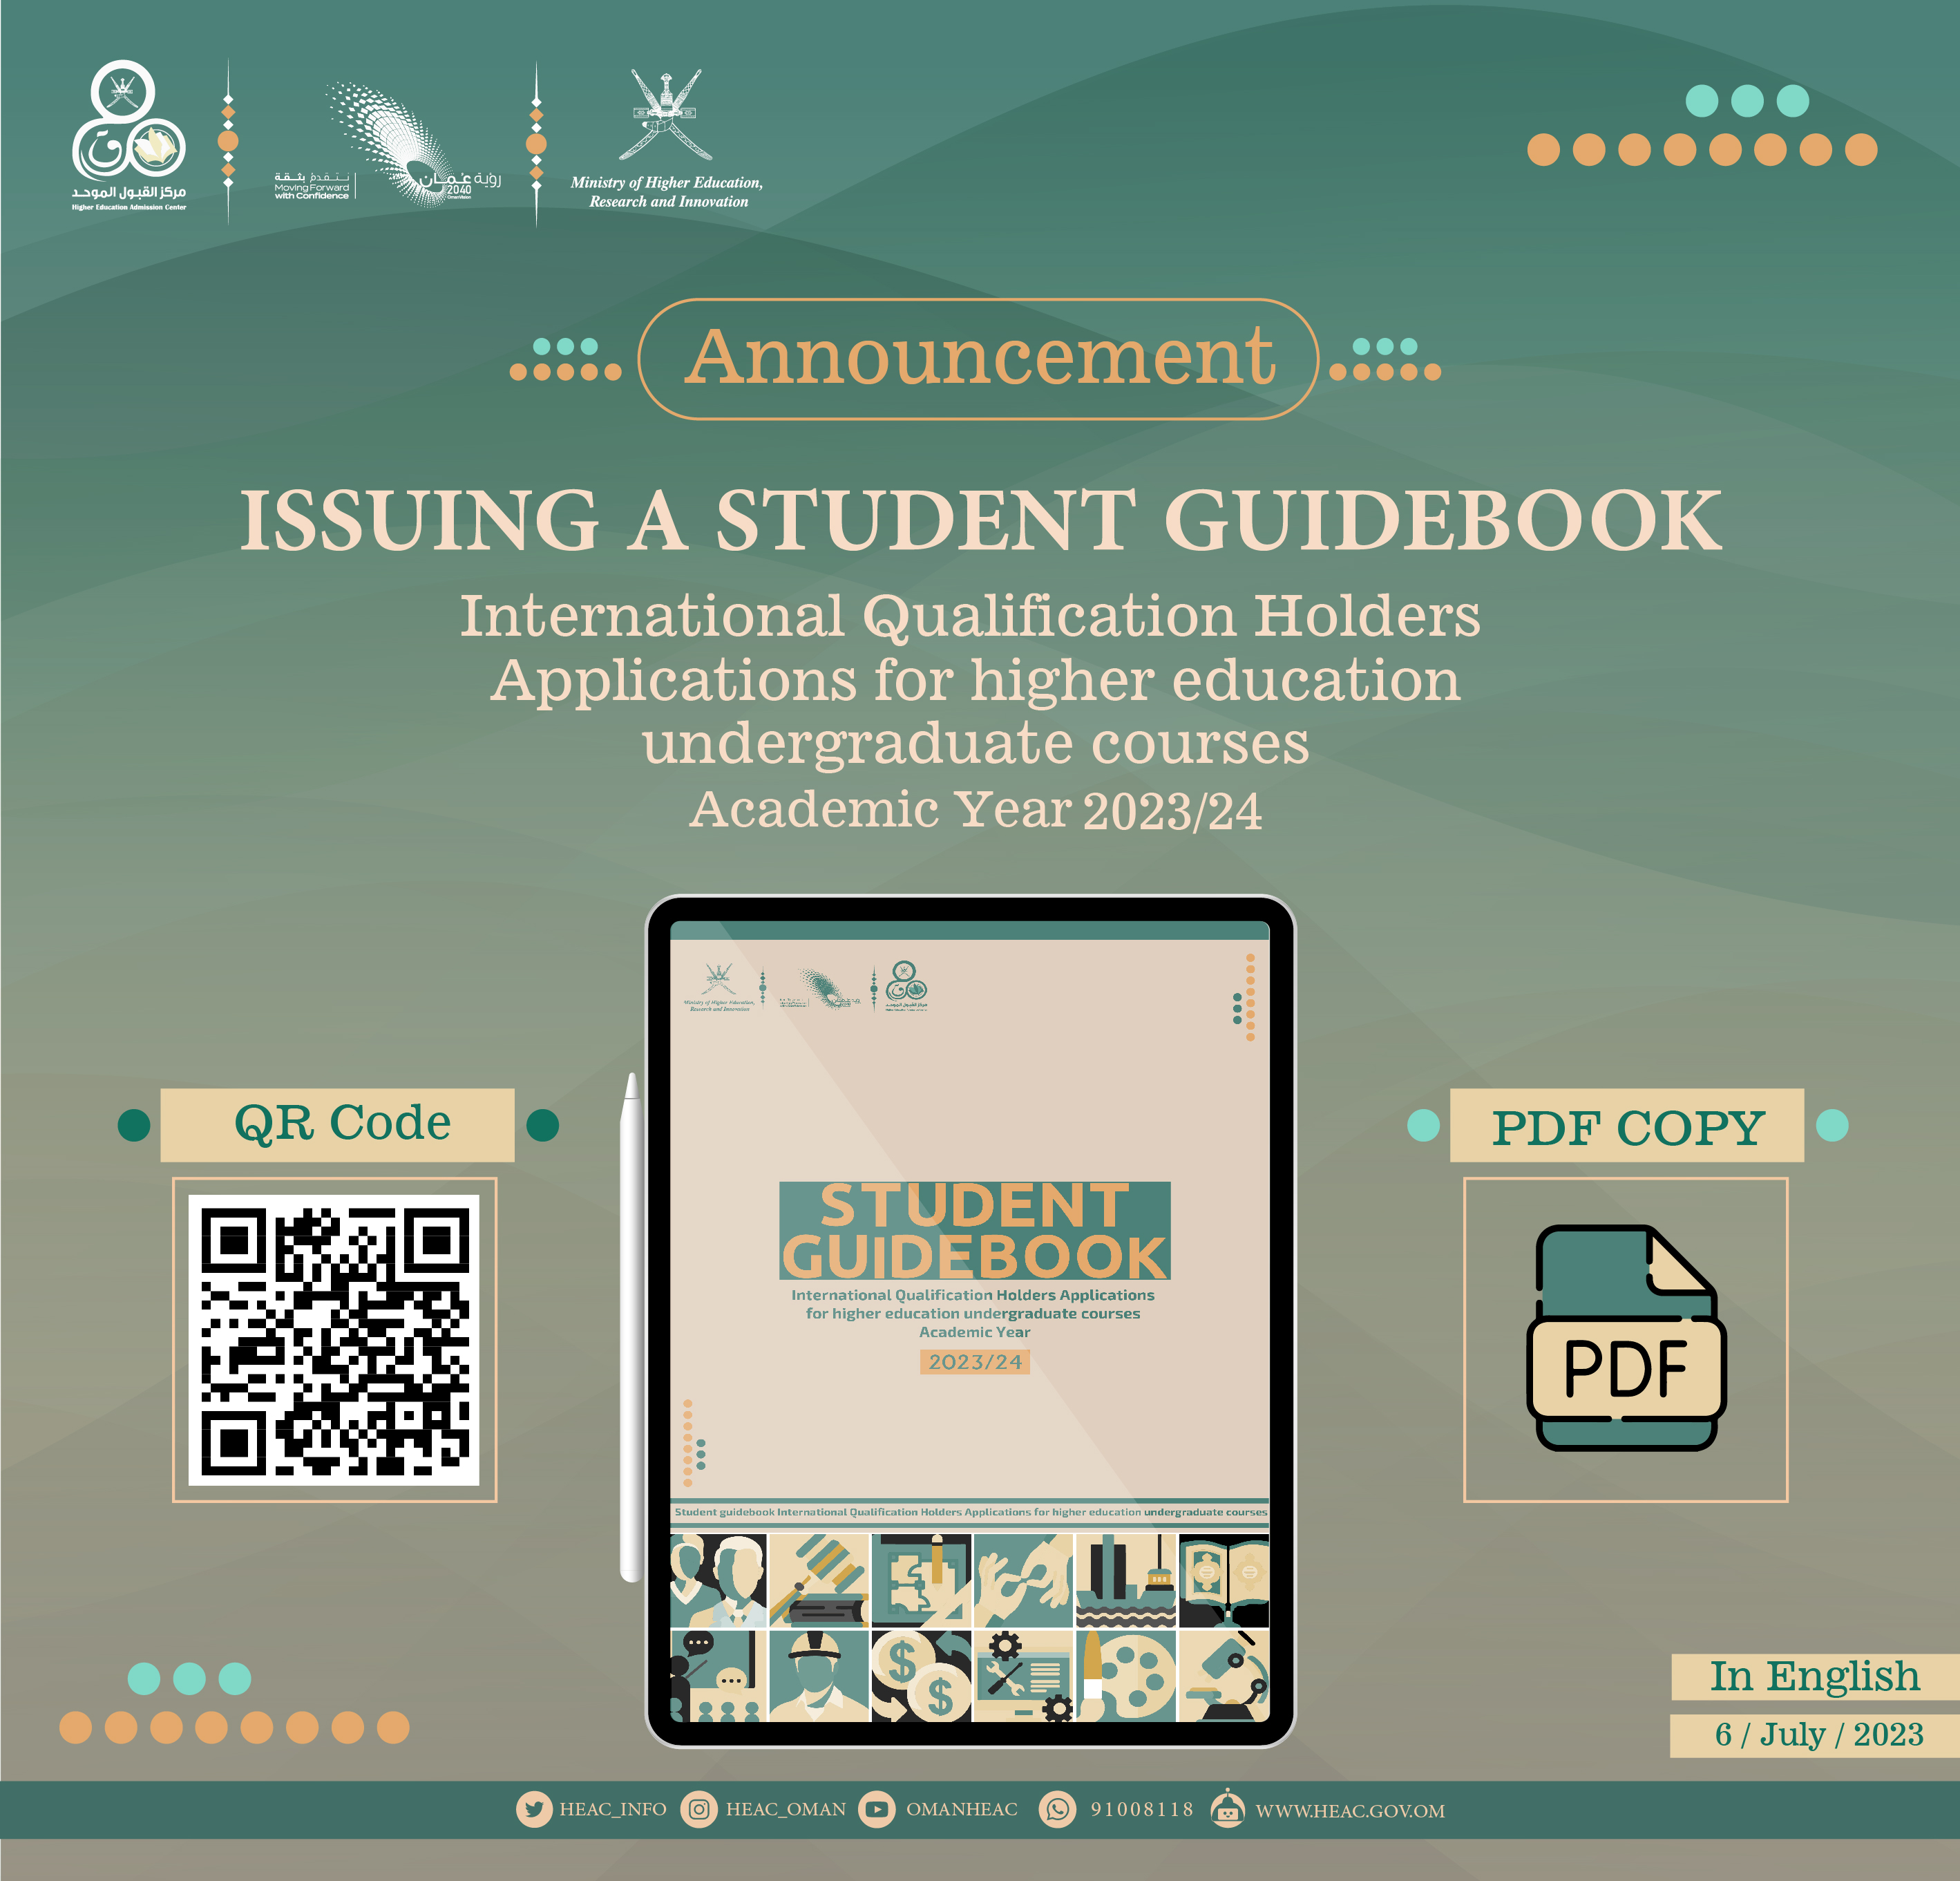 Student Guidebook for International Qualifications Holders Applications for higher education undergraduate courses for the academic year 2023/2024